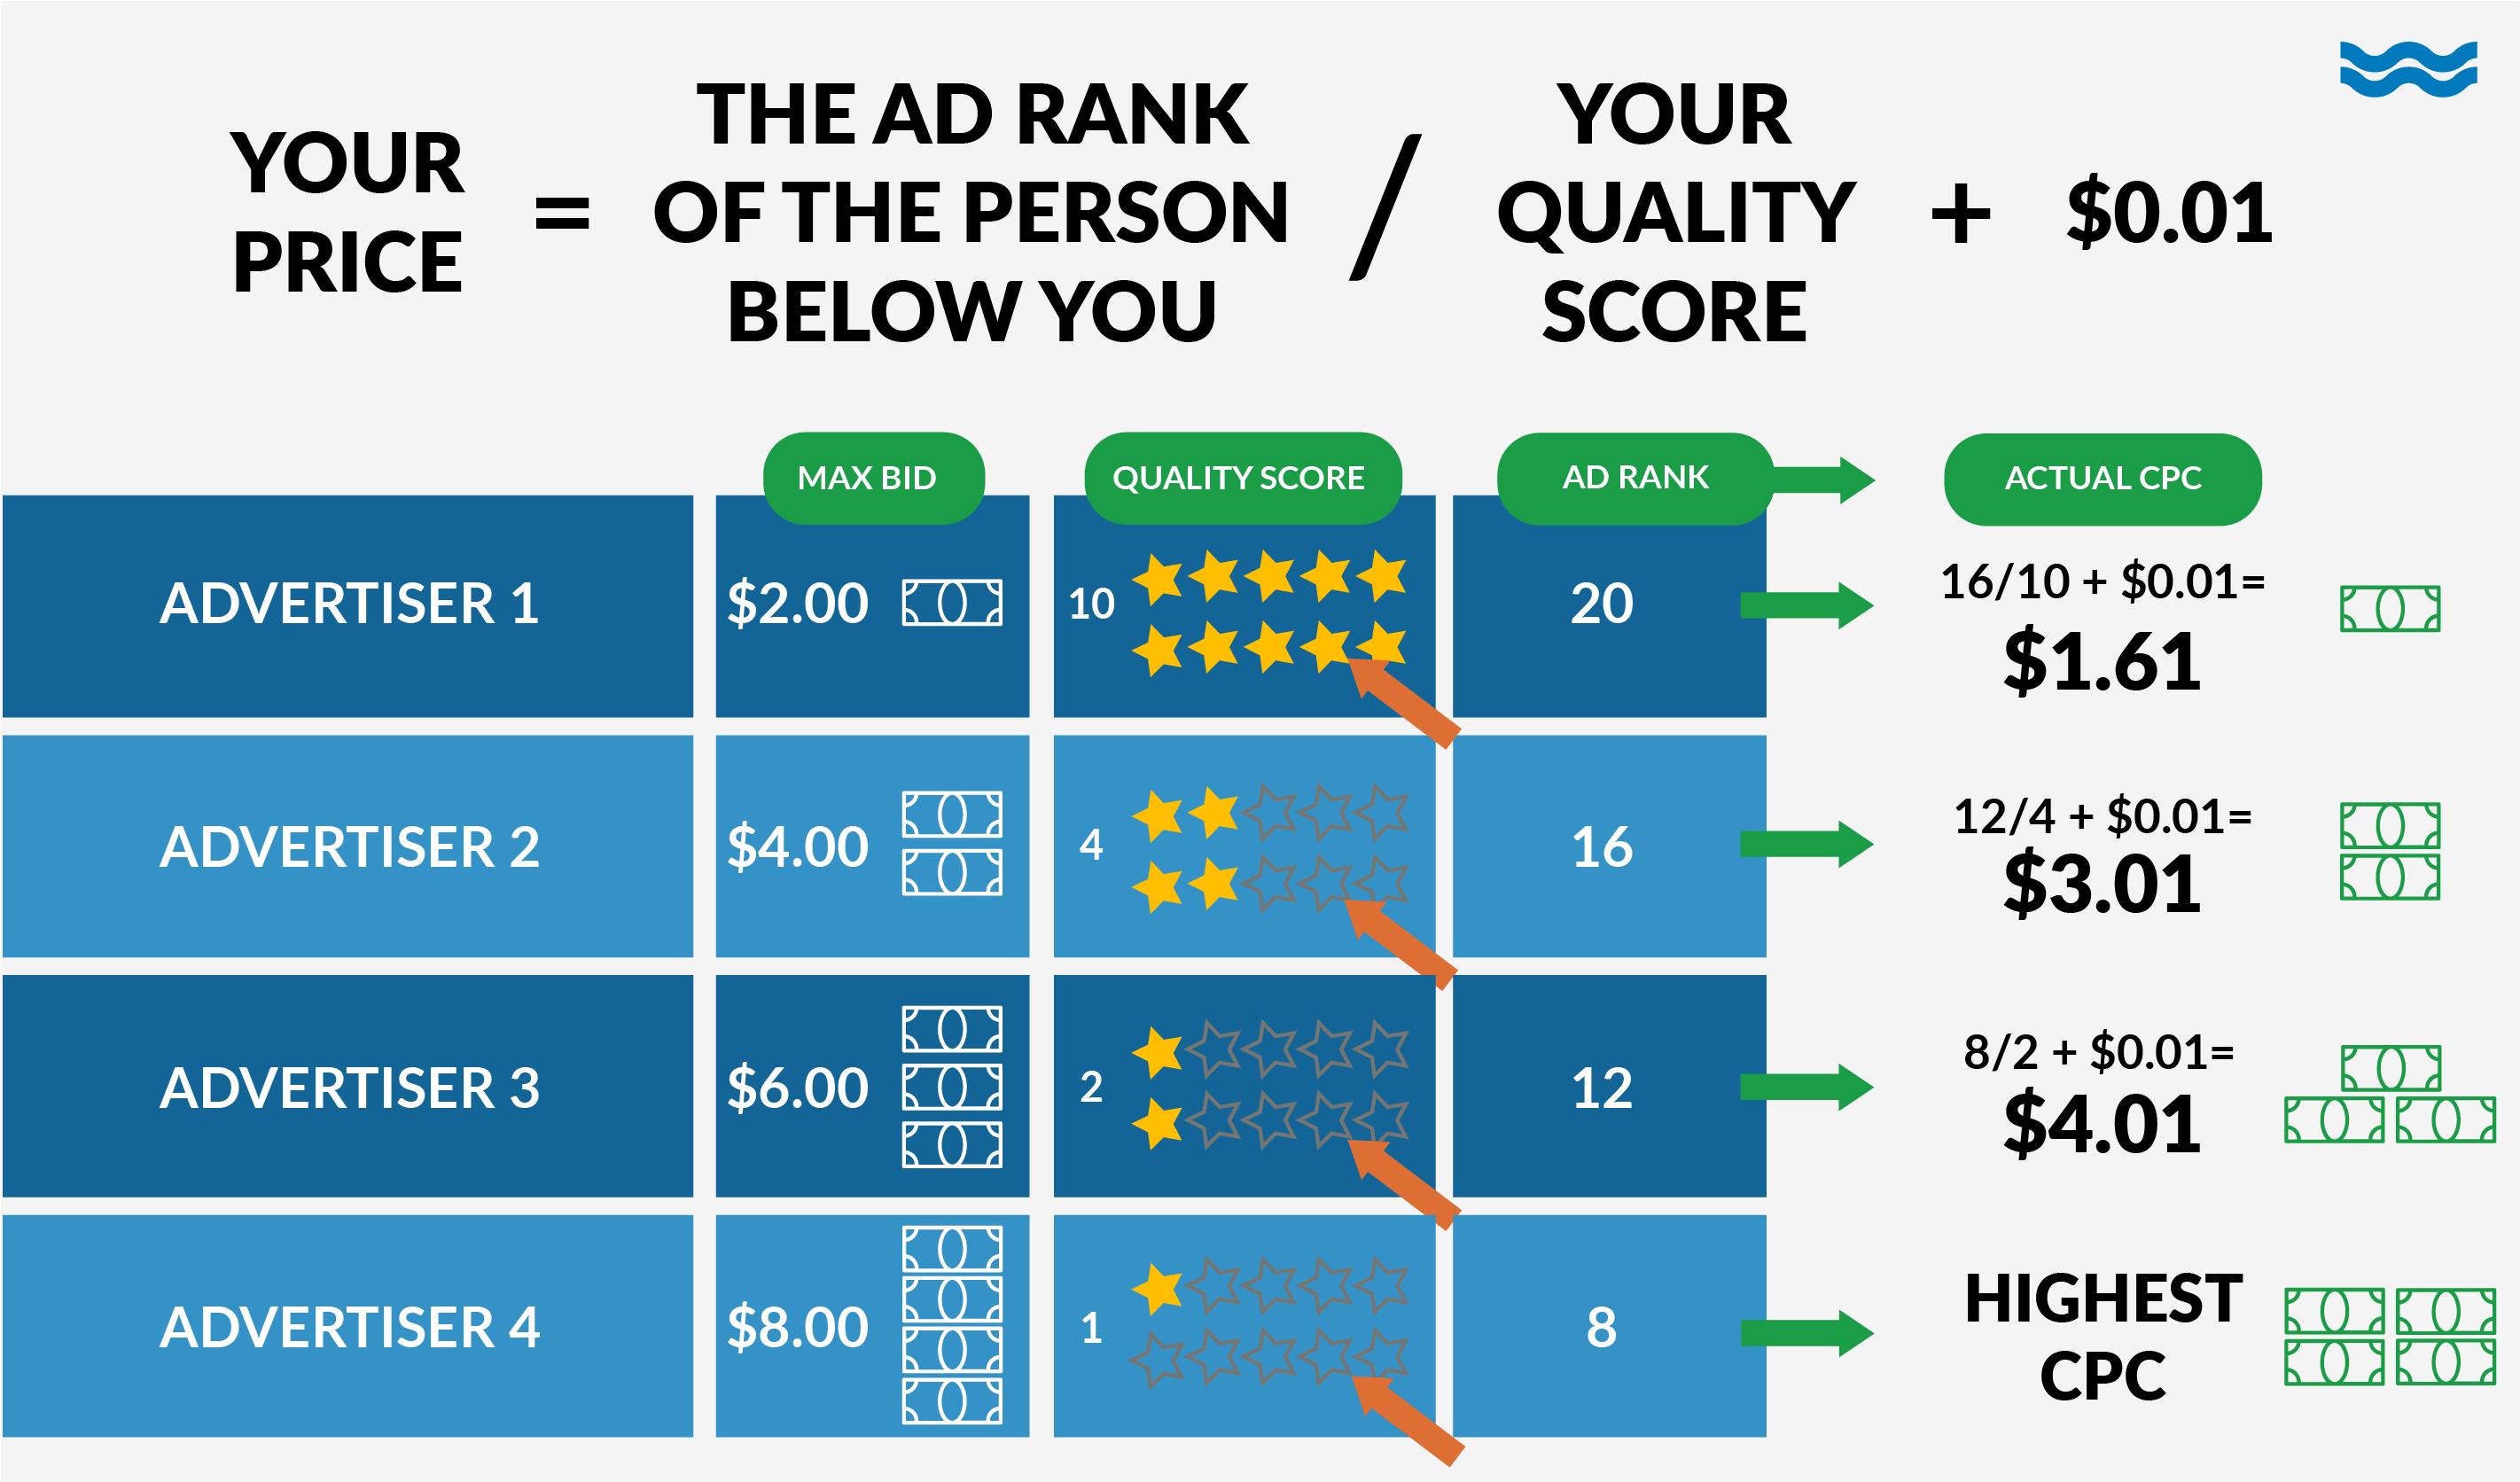 how quality scores and ad ranks are calculated